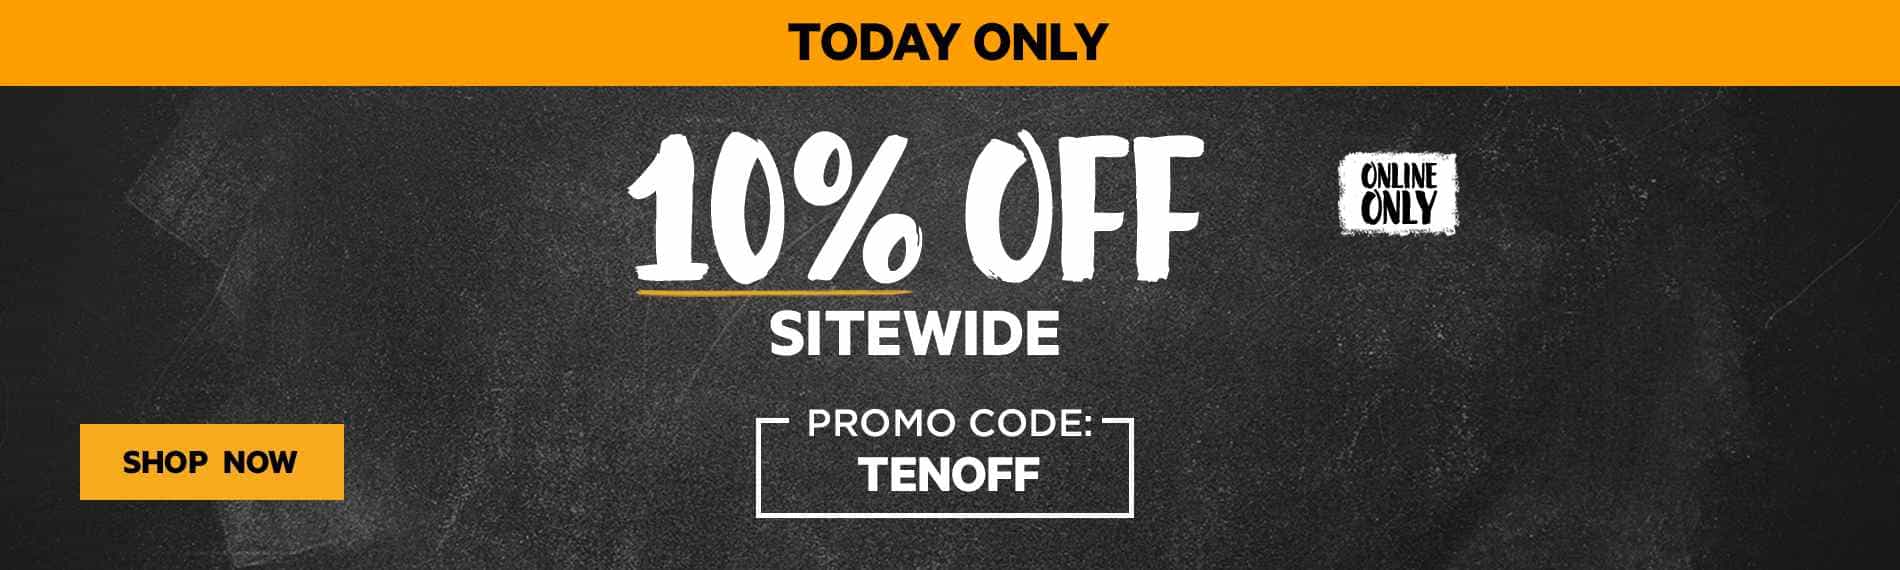 10% OFF sitewide